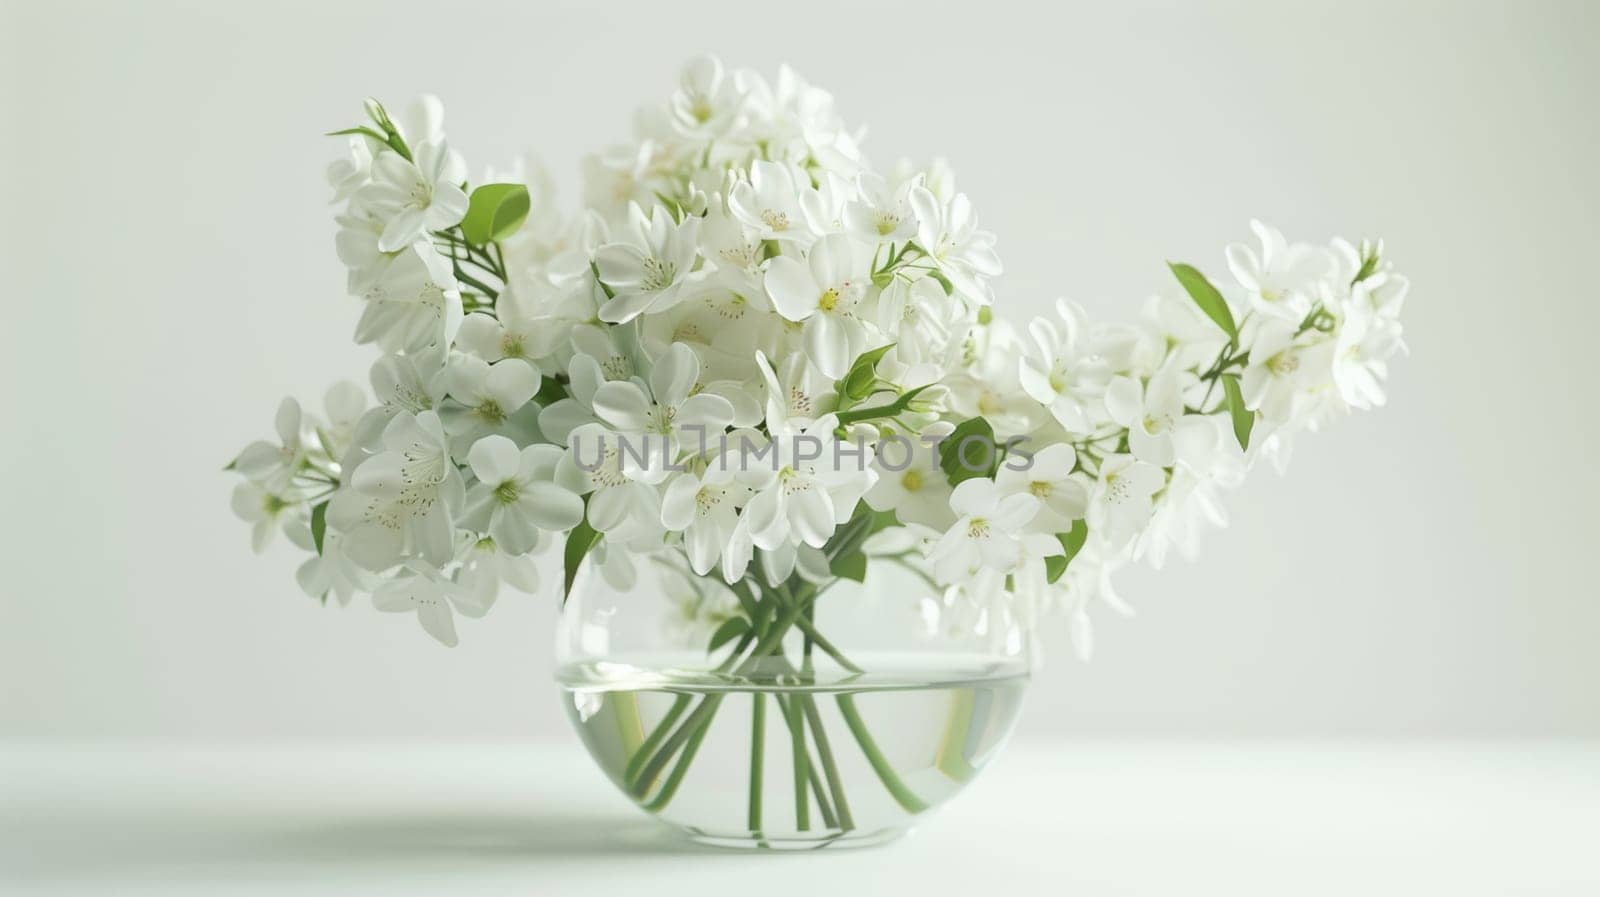 A vase of a clear glass with white flowers in it, AI by starush